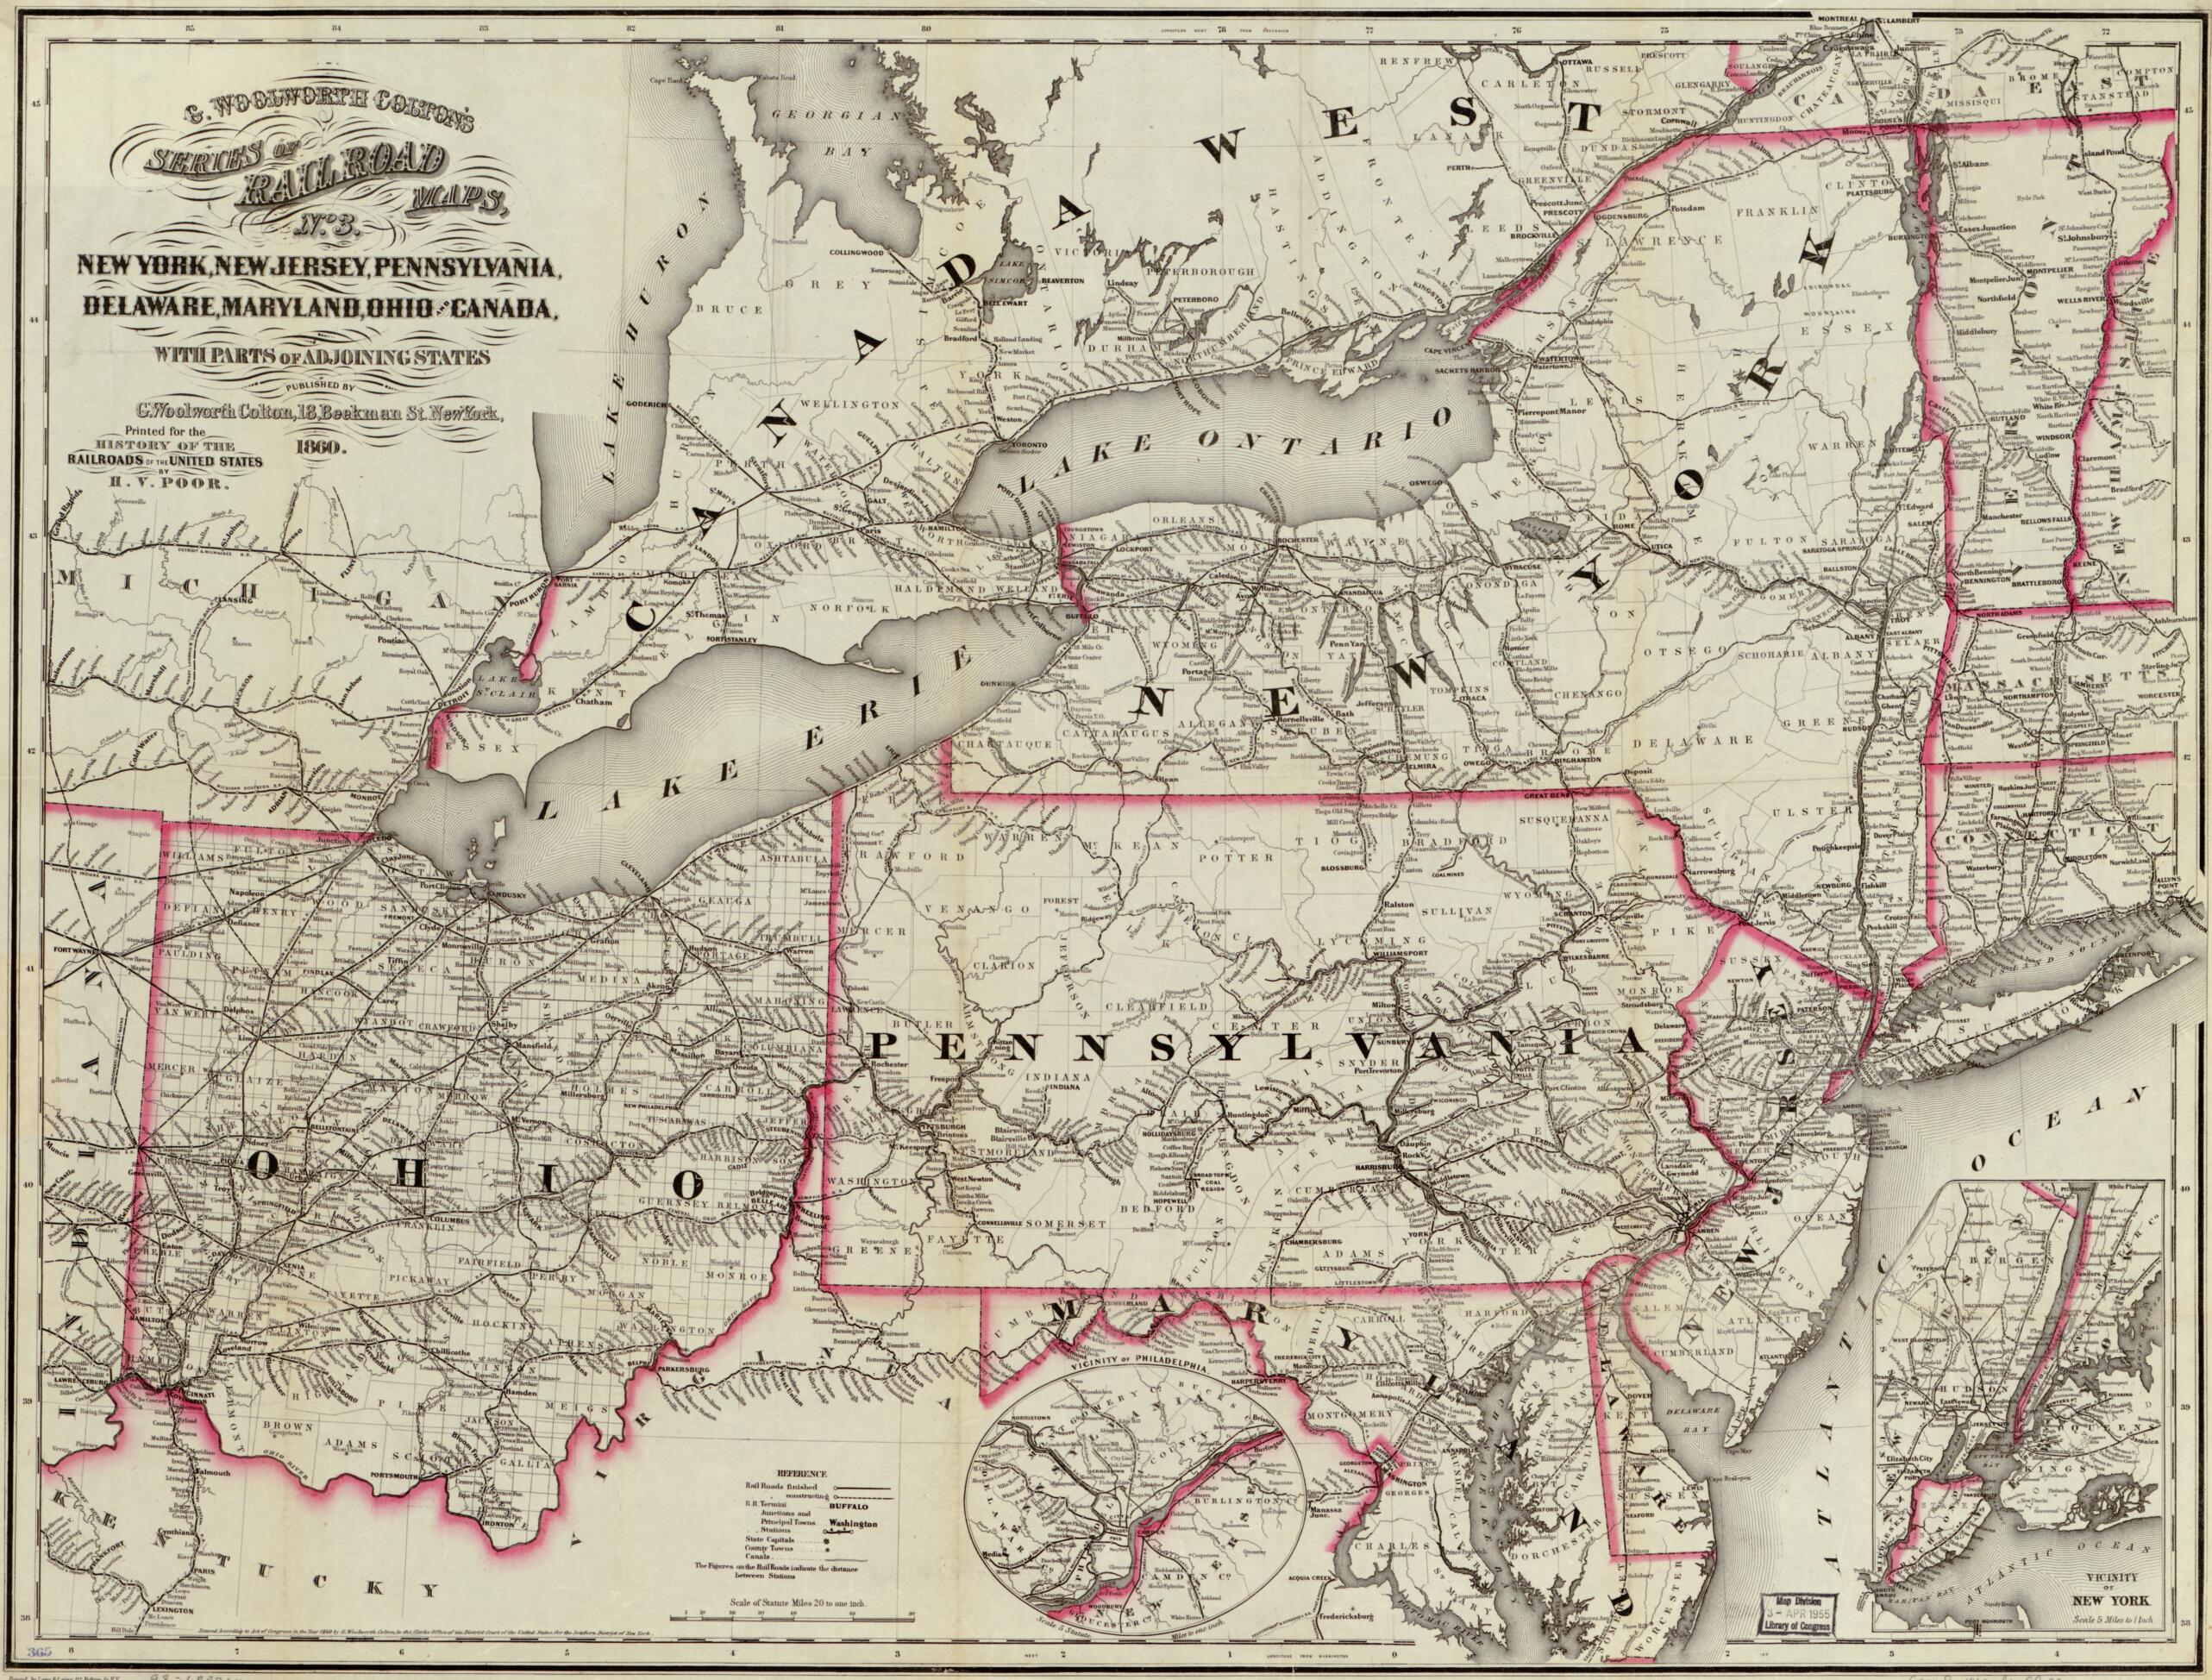 This old map of New York, New Jersey, Pennsylvania, Delaware, Maryland, Ohio and Canada, With Parts of Adjoining States from 1860 was created by G. Woolworth (George Woolworth) Colton in 1860